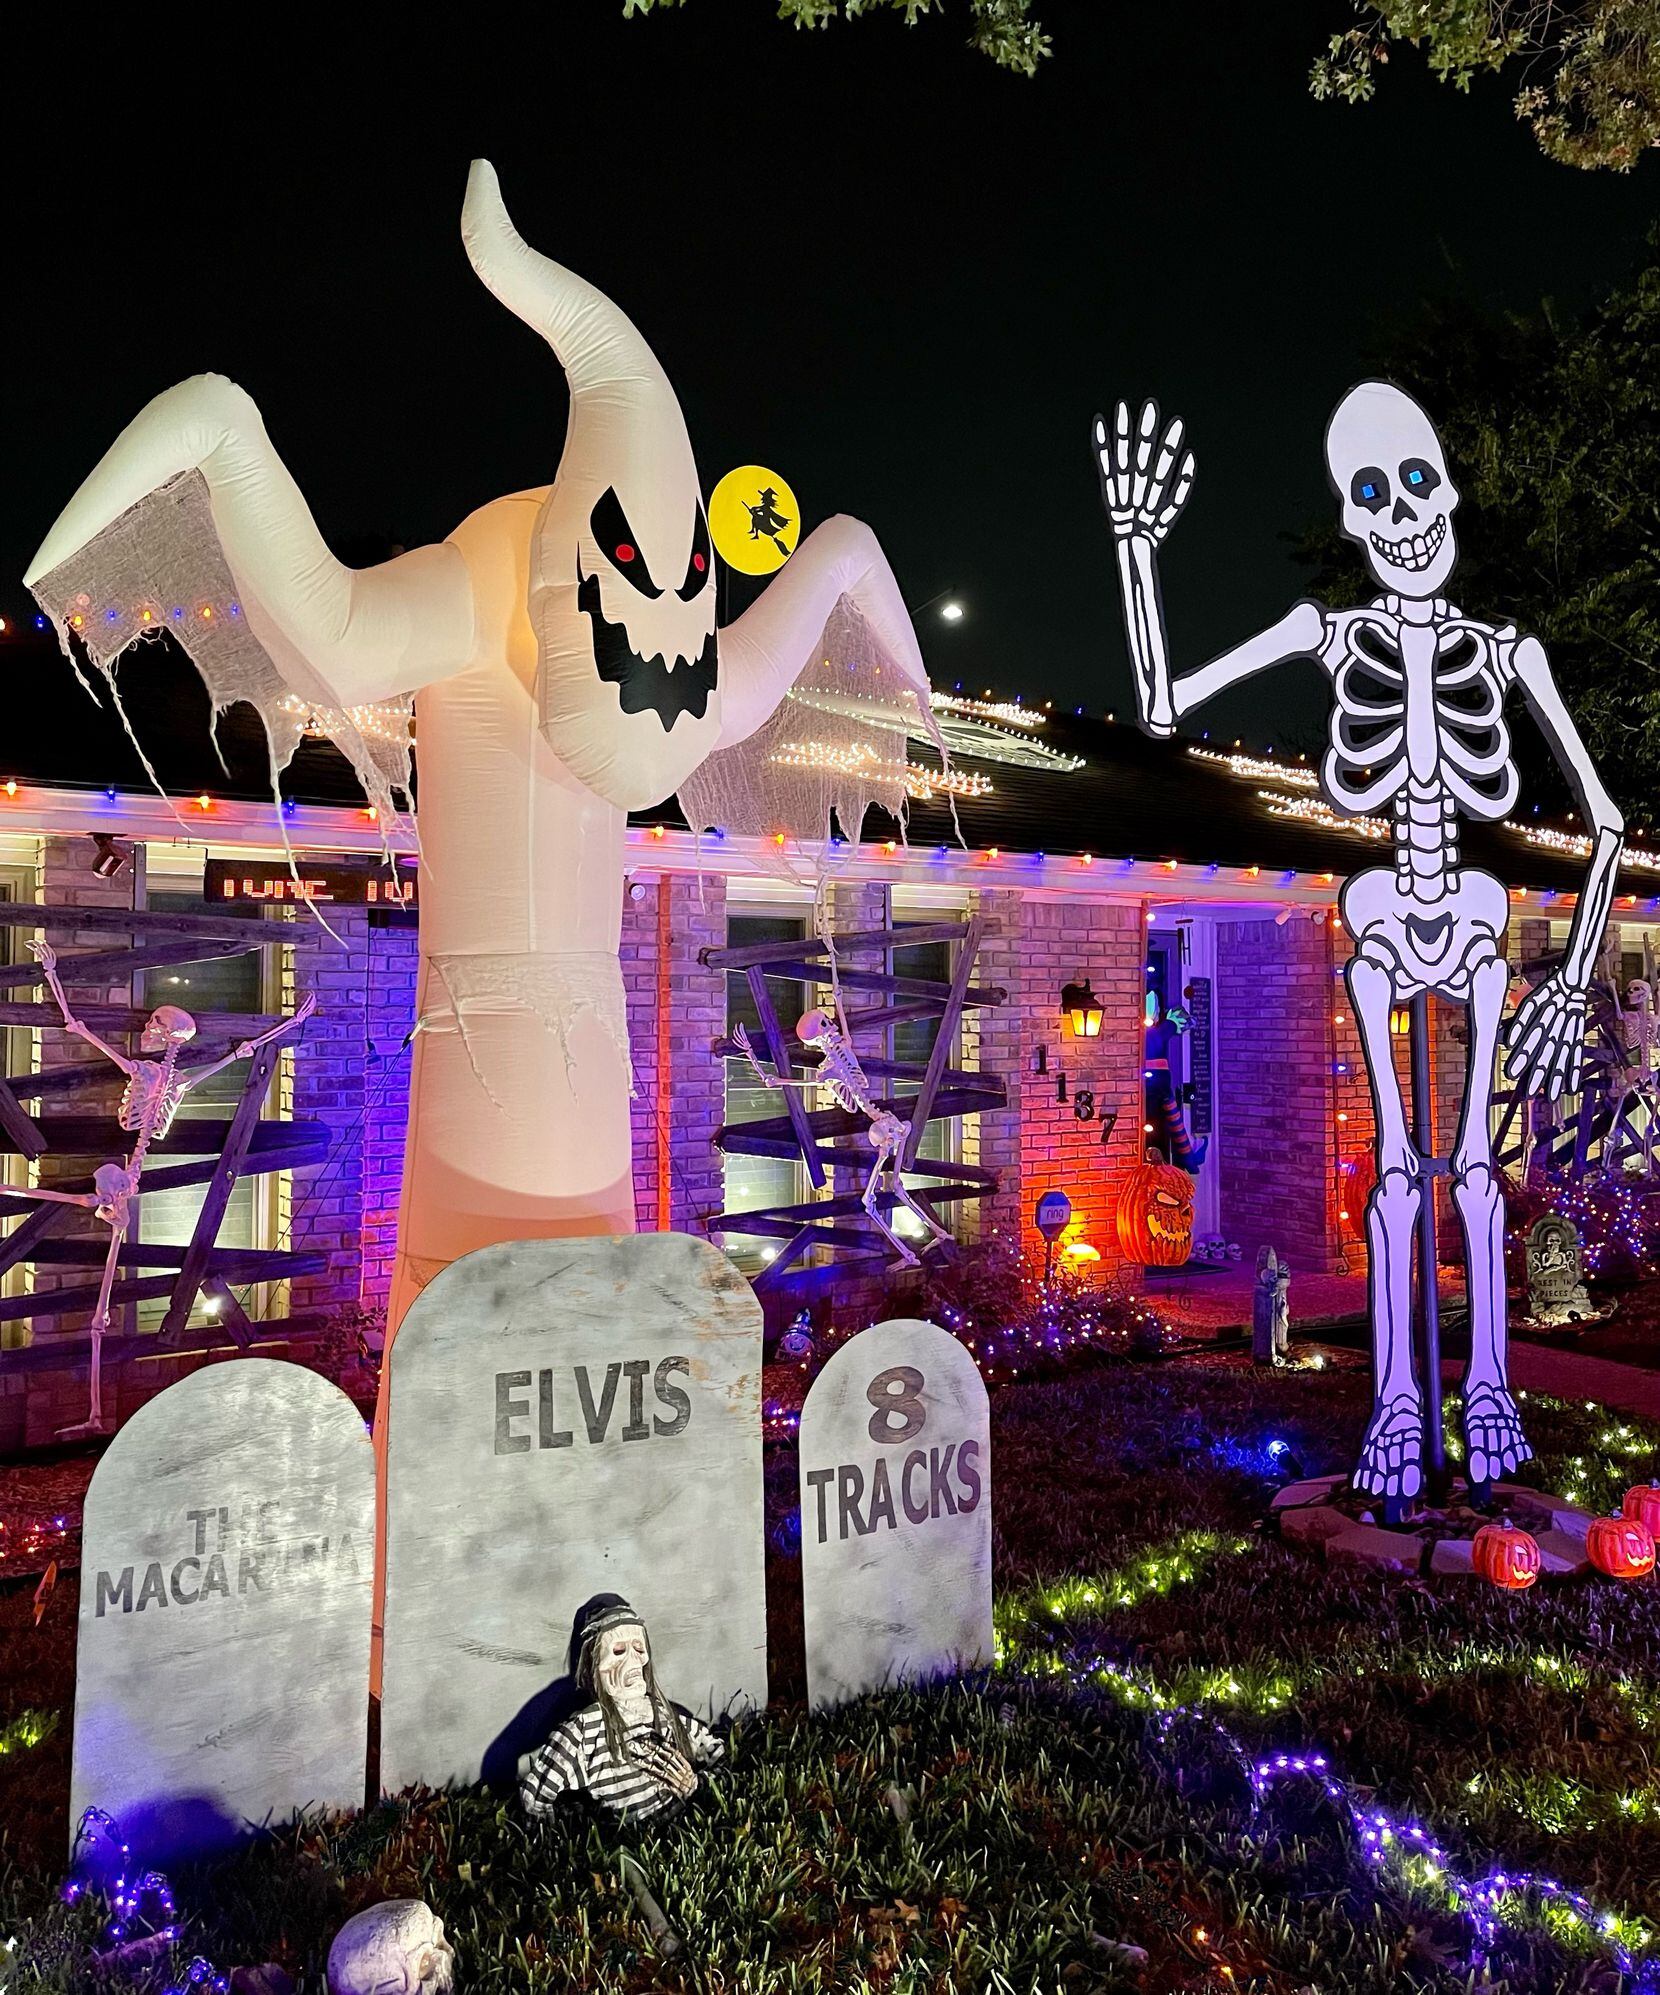 The Halloween decorations are set to festive music, including "Monster Mash," "Thriller" and...